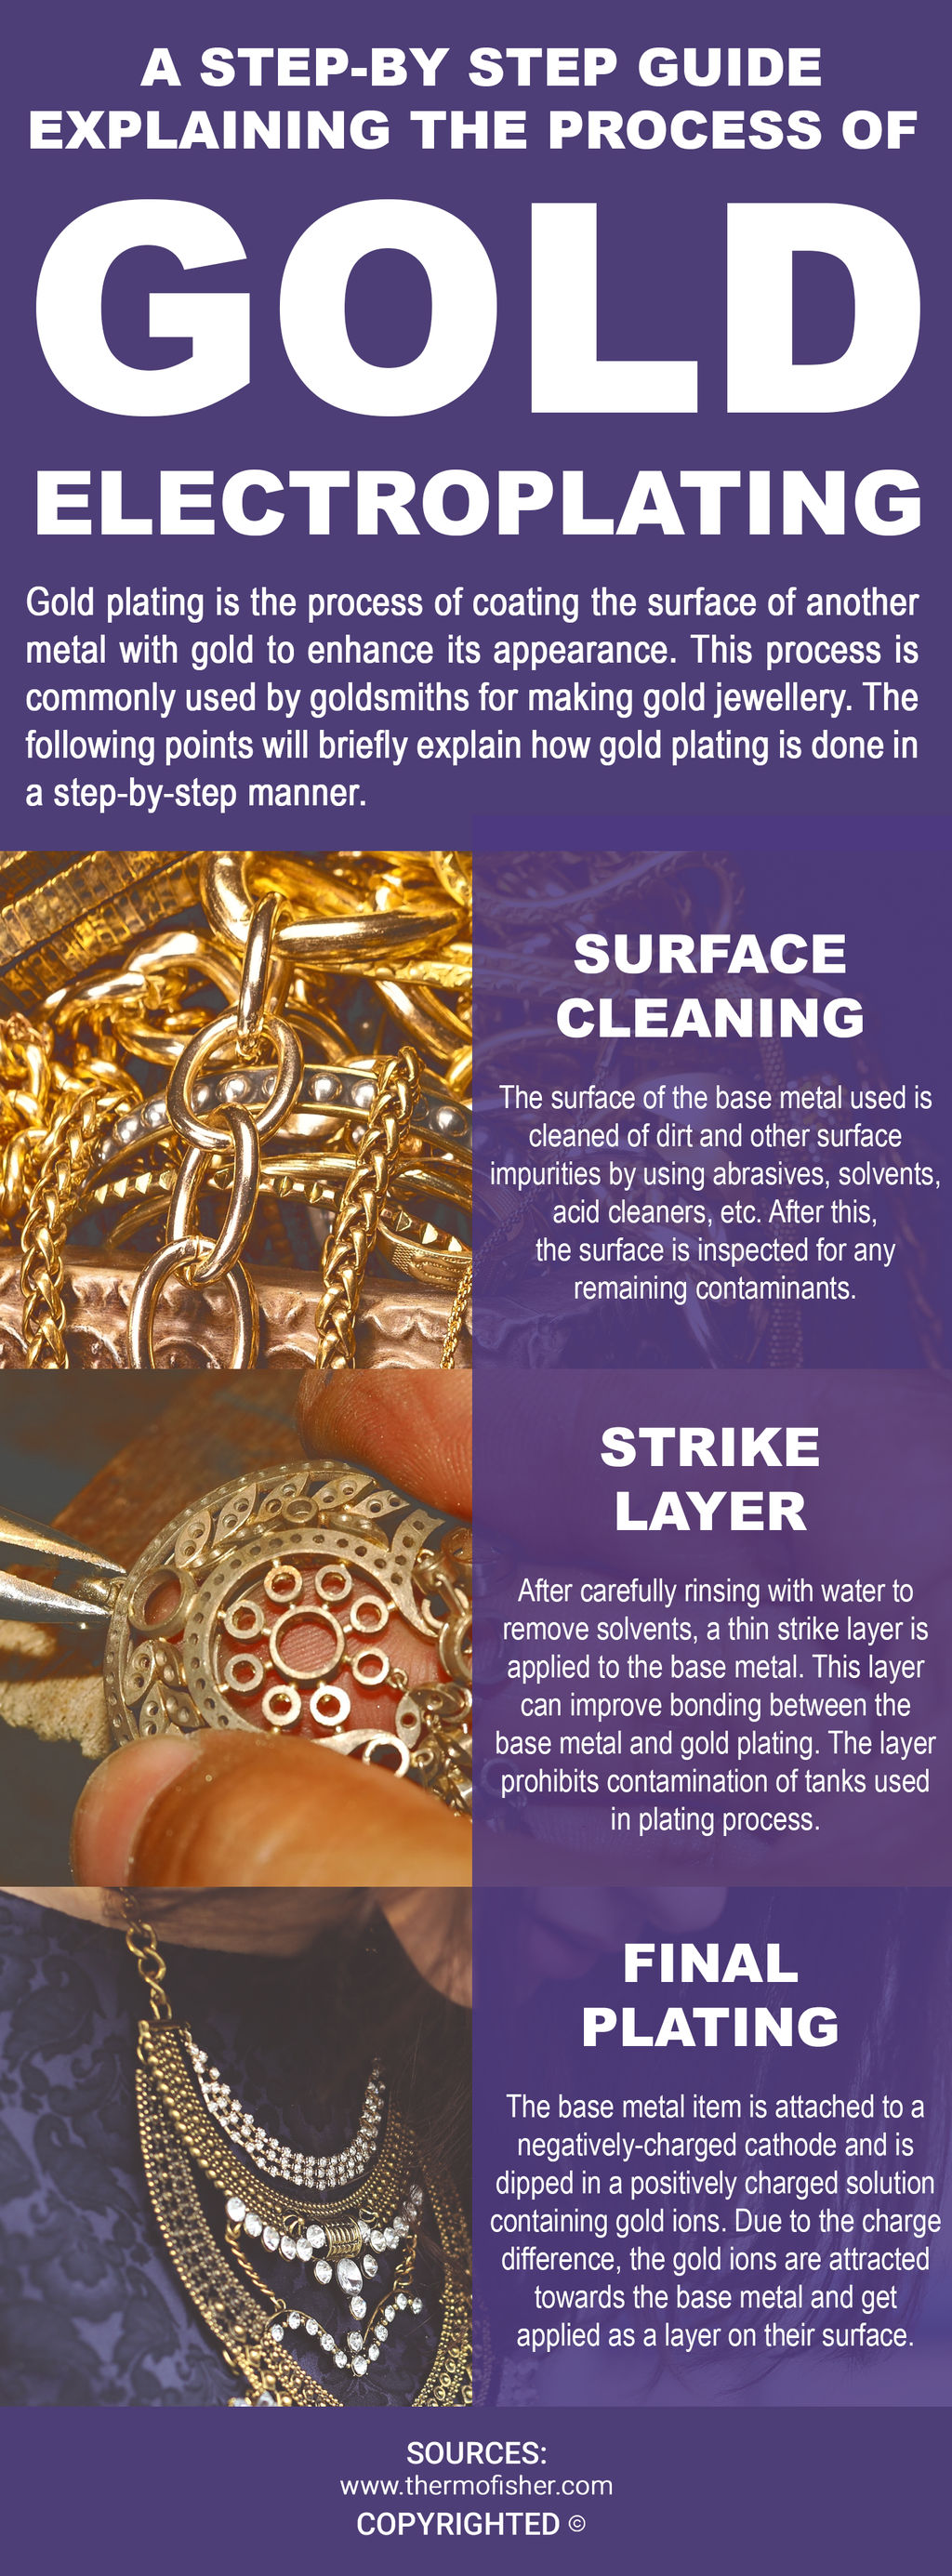 How Do You Make A Gold Plating Solution?